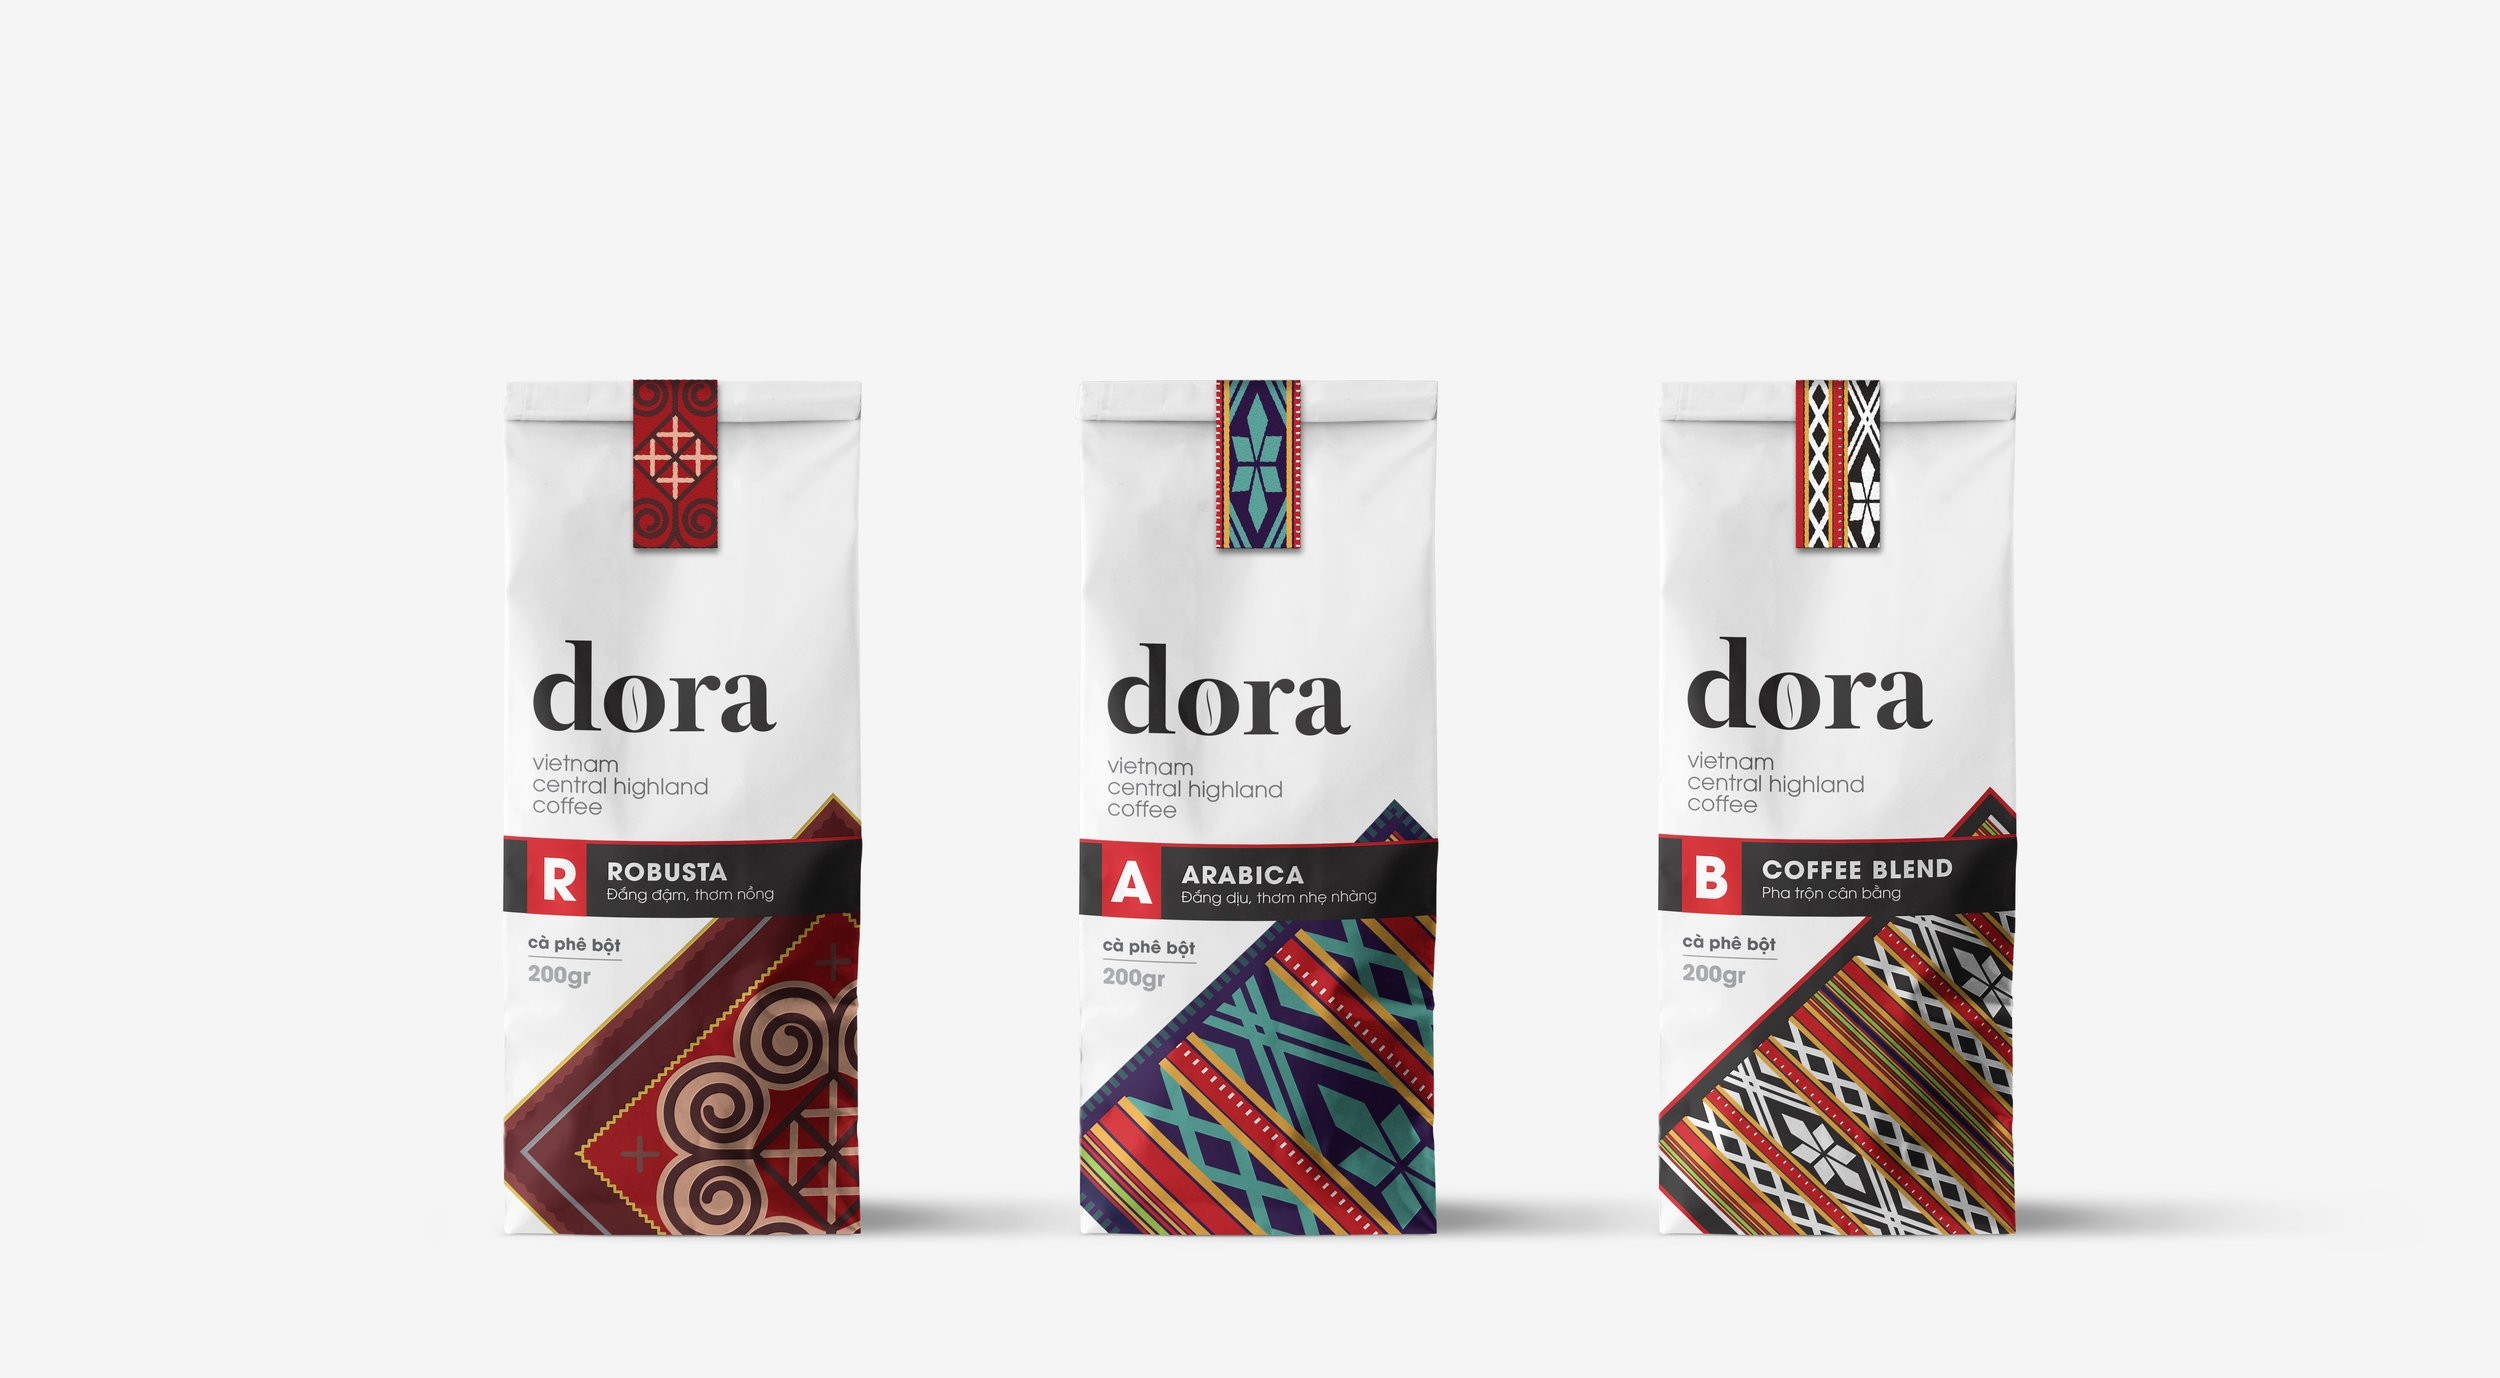 Authentic Branded Packaging, Designed for Vietnam Central Highlands Coffee Branded Packaging